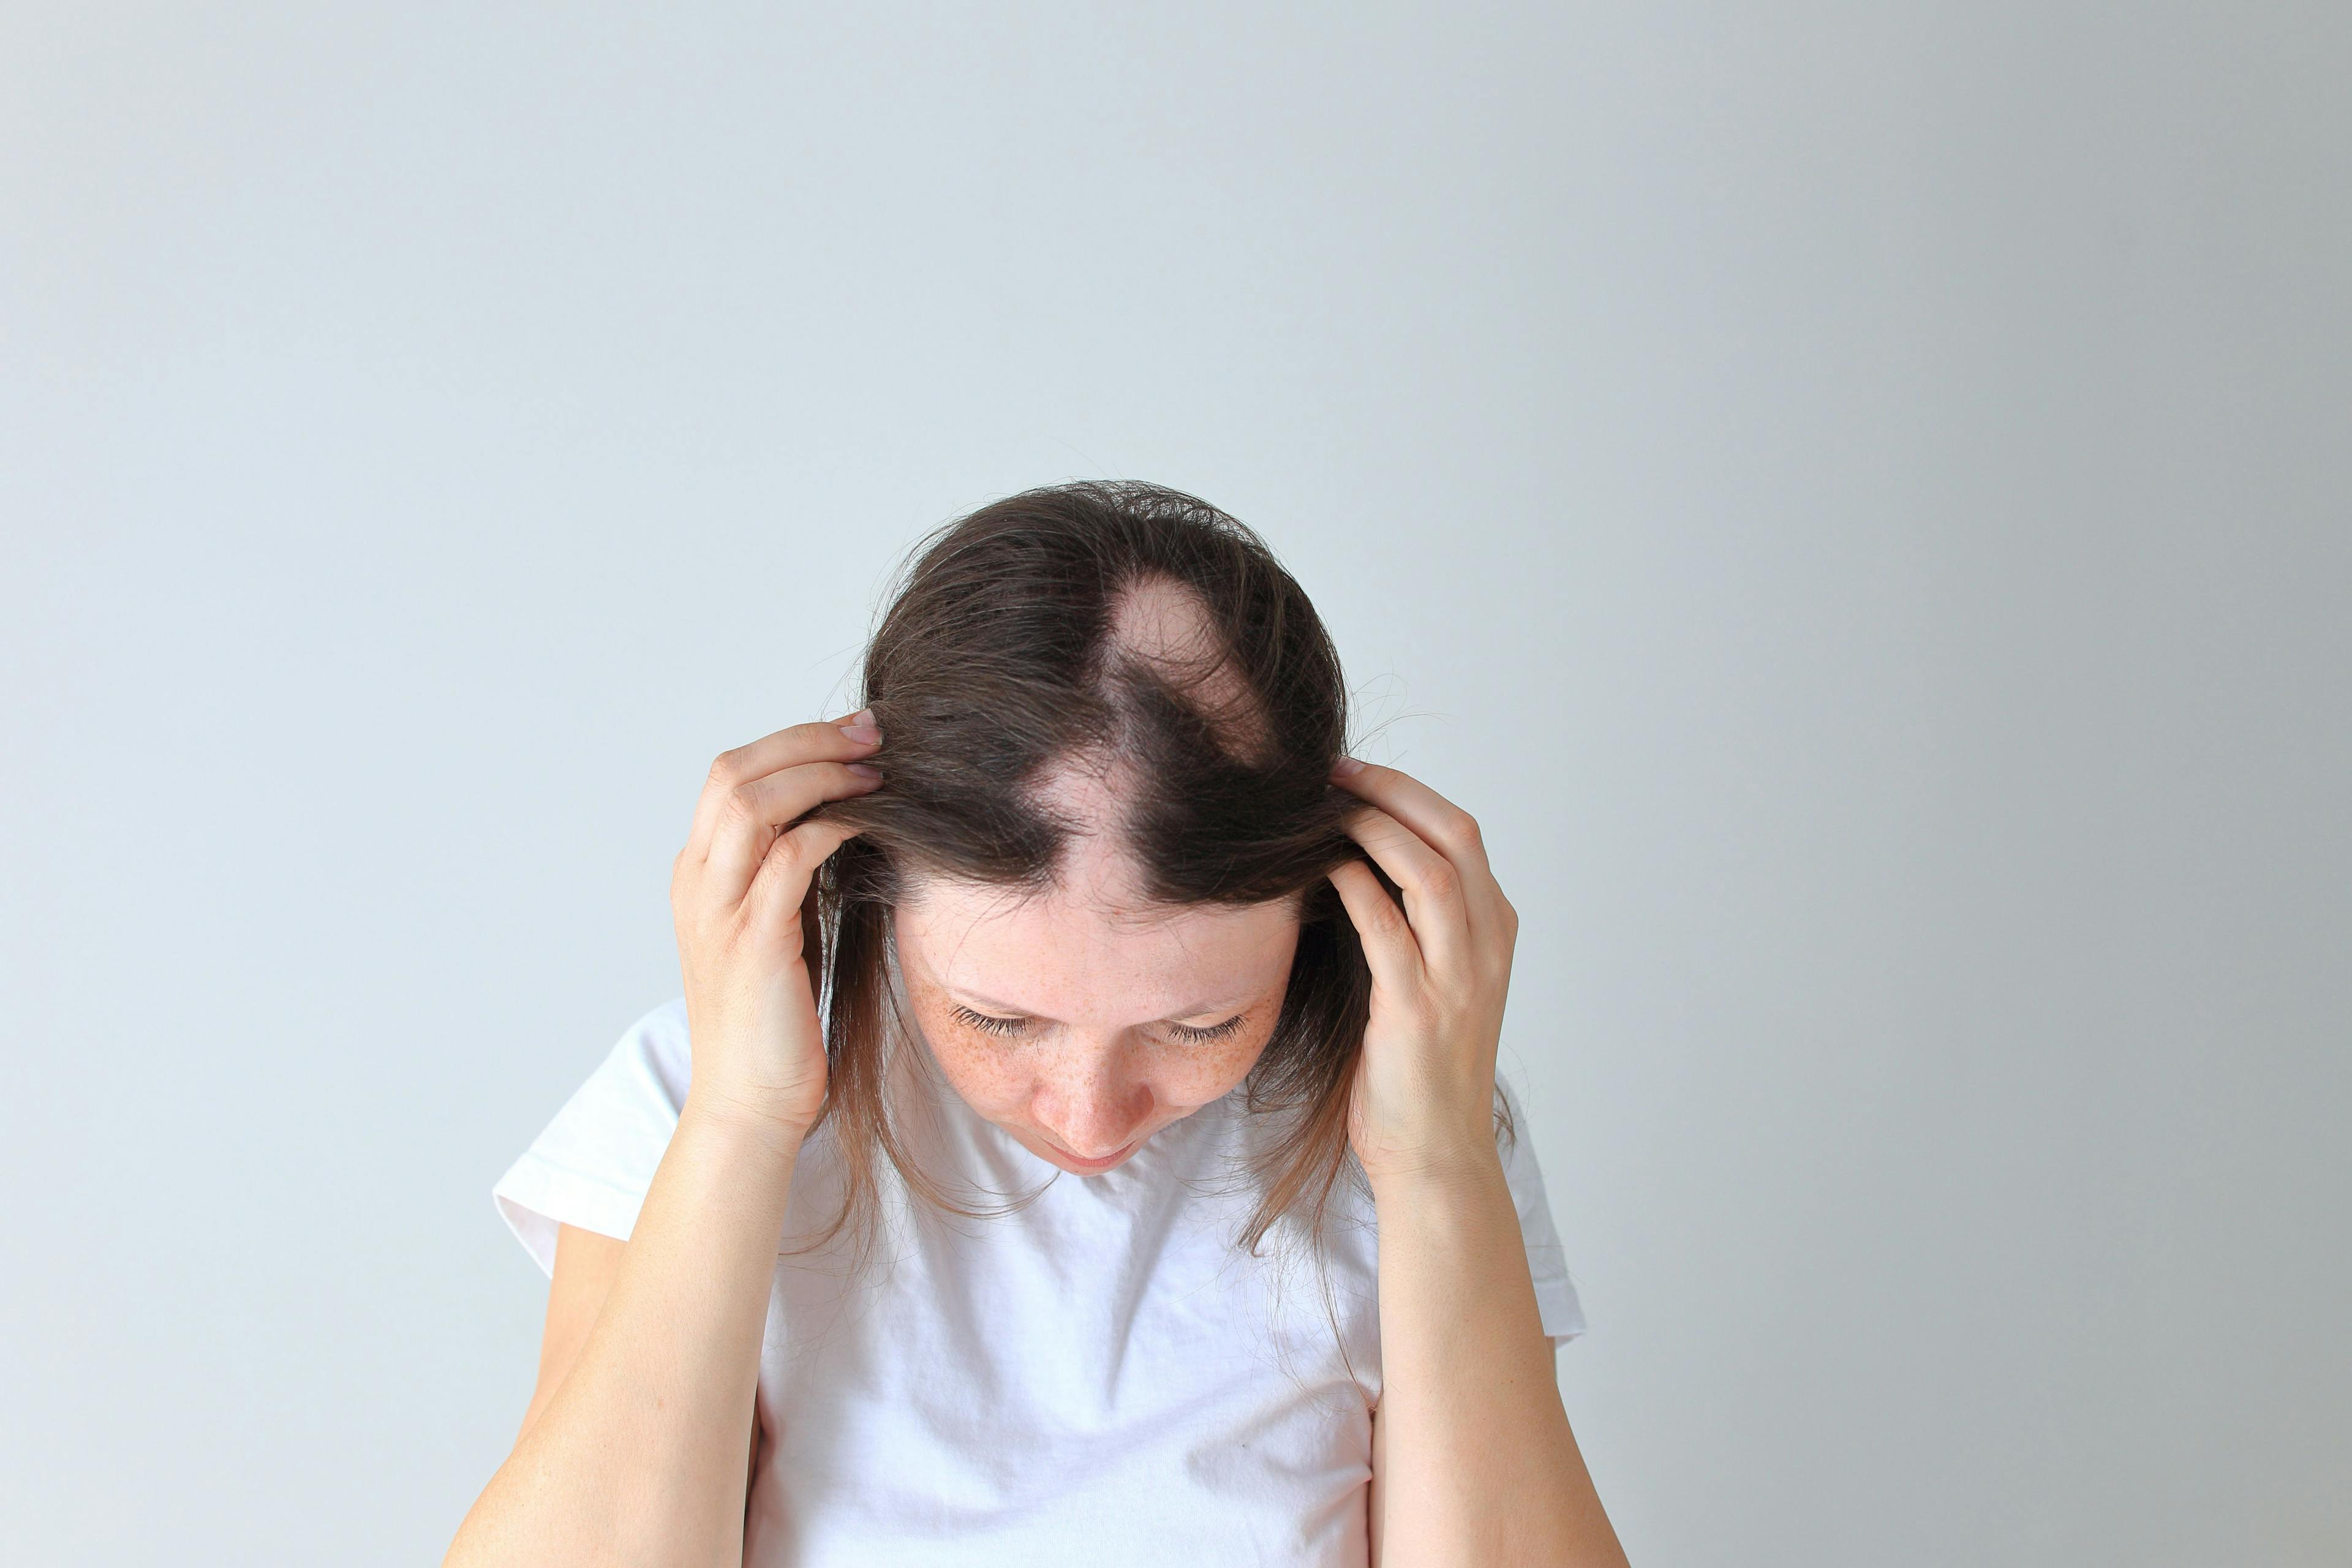 Children of Mothers With Alopecia Areata More Likely to Develop Certain Disorders